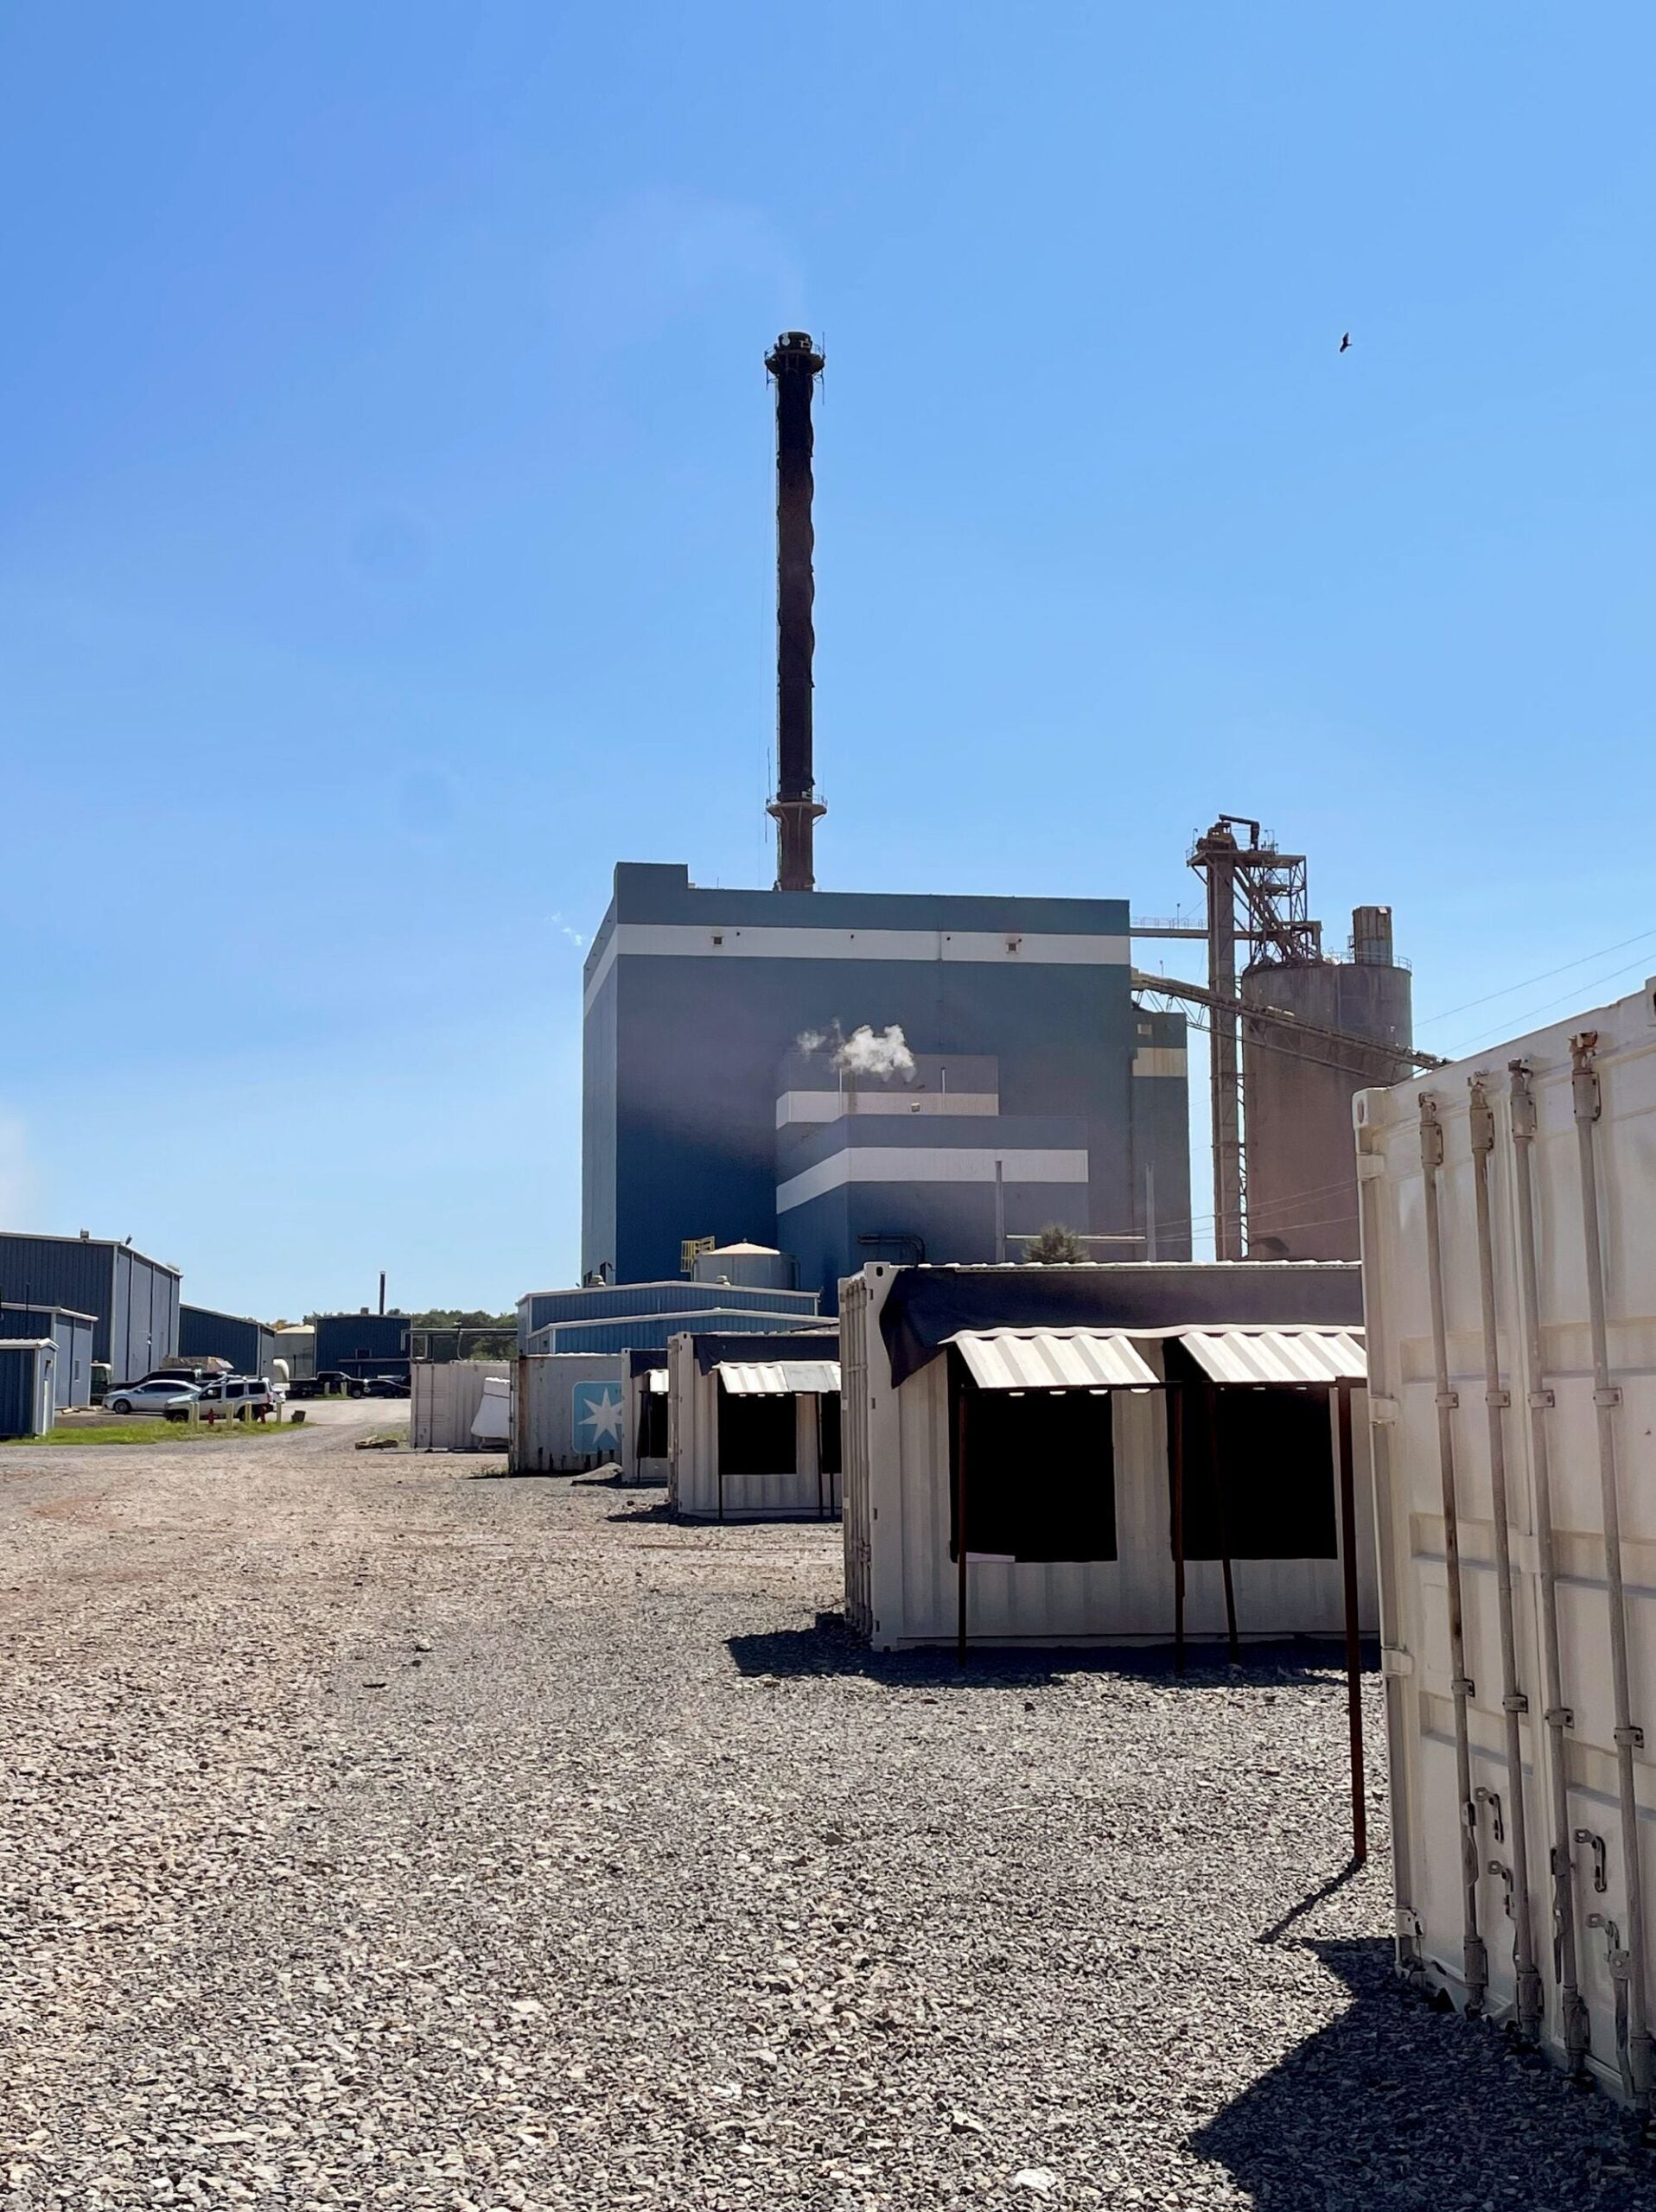 The Scrubgrass Generating Plant near Kennerdell, Pennsylvania, in Venango County, owned by Stronghold Digital Mining, Inc., burns waste coal to generate electricity for the company’s cryptocurrency mining.